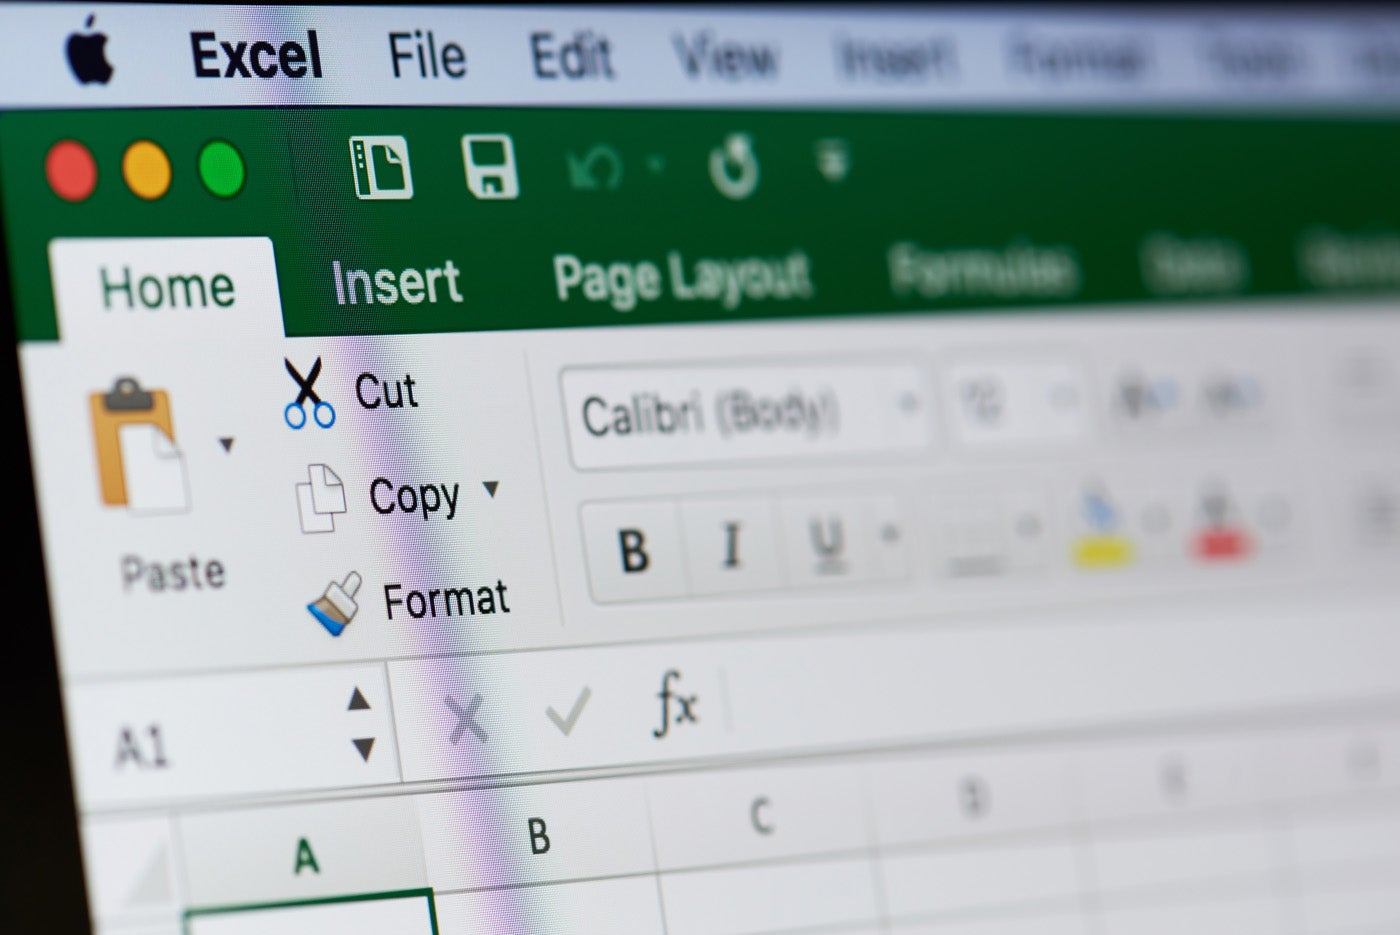 How to Extract a Substring in Excel Using FIND() and MID() Functions